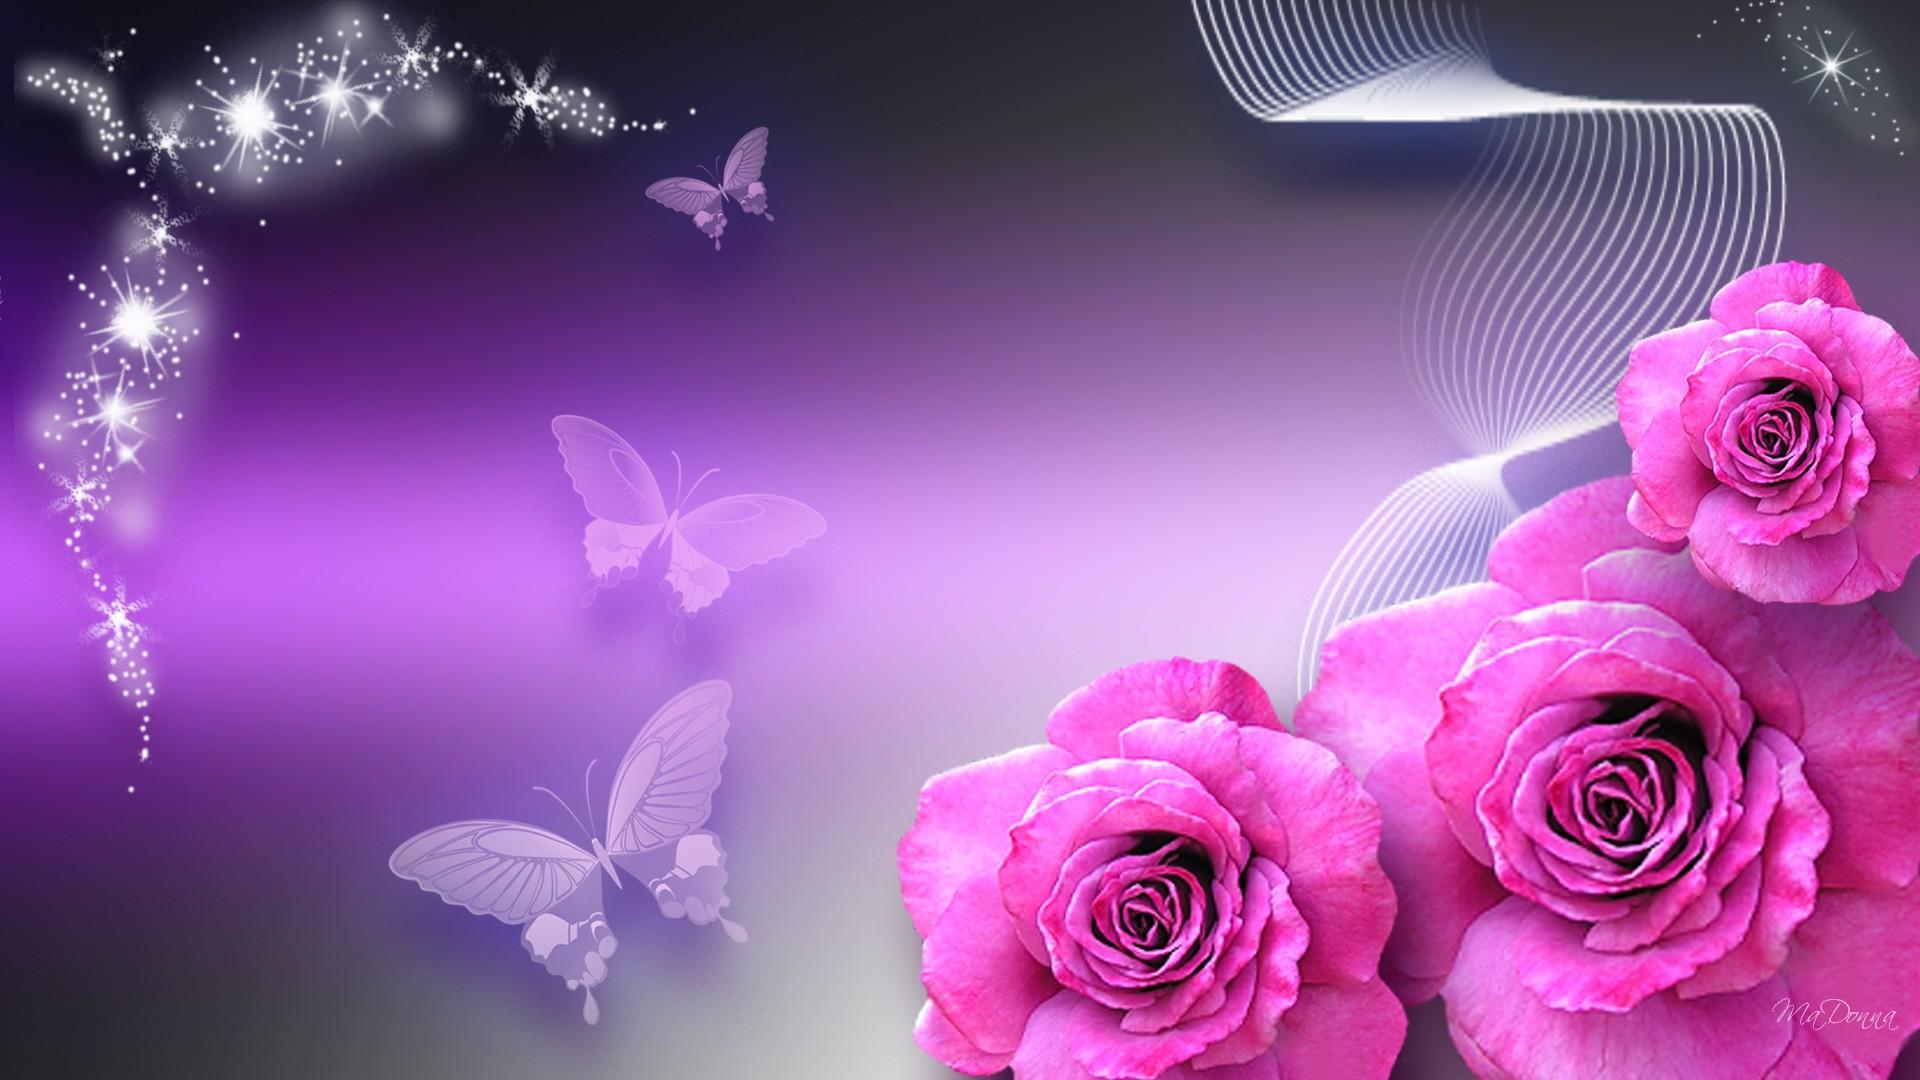 Wallpaper For > Purple And Pink Hearts Wallpaper